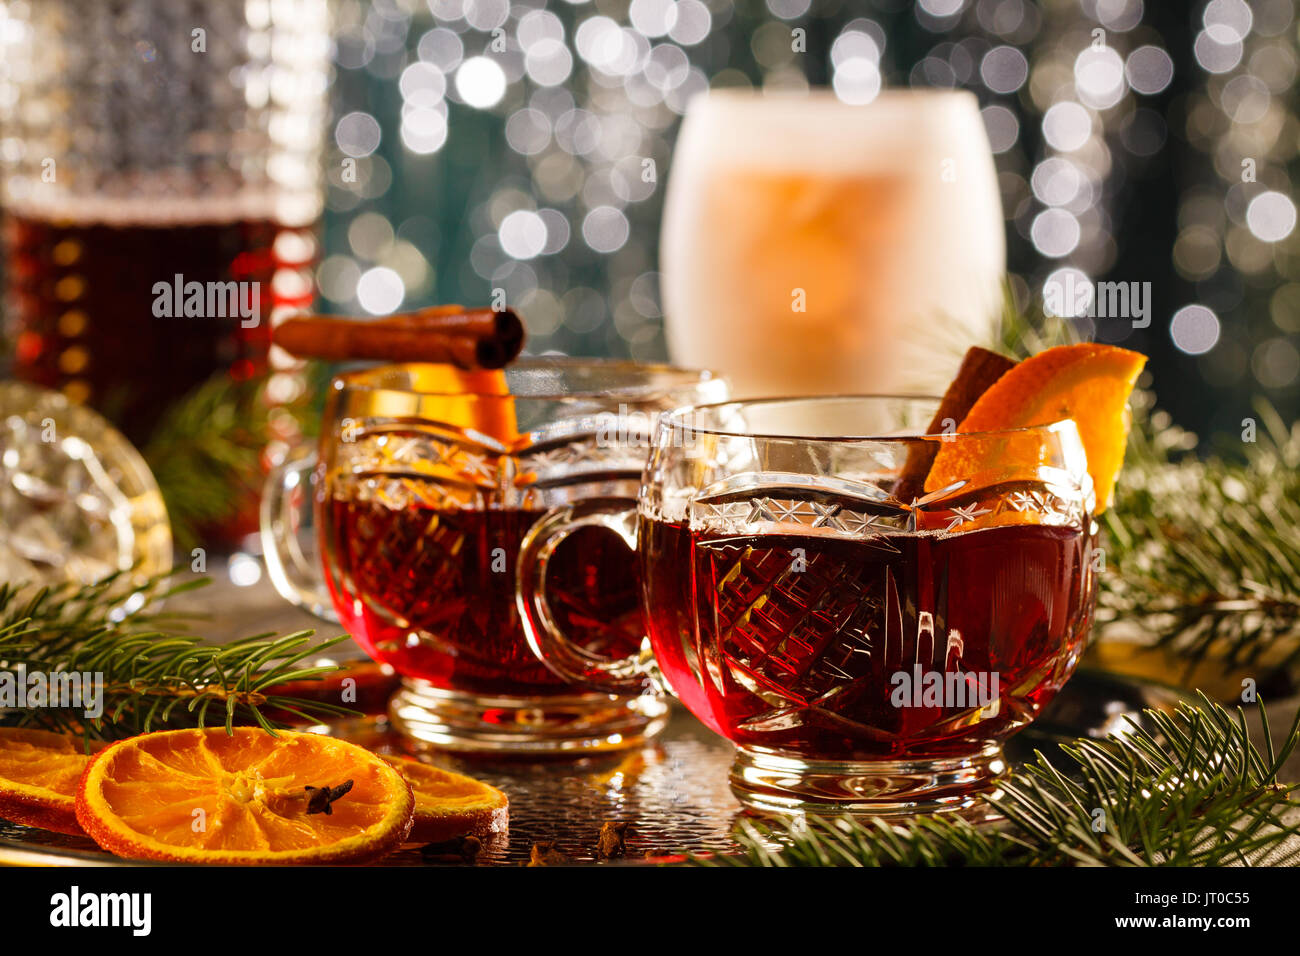 Hot mulled wine with orange slices and cinnamon sticks on Christmas time. Stock Photo